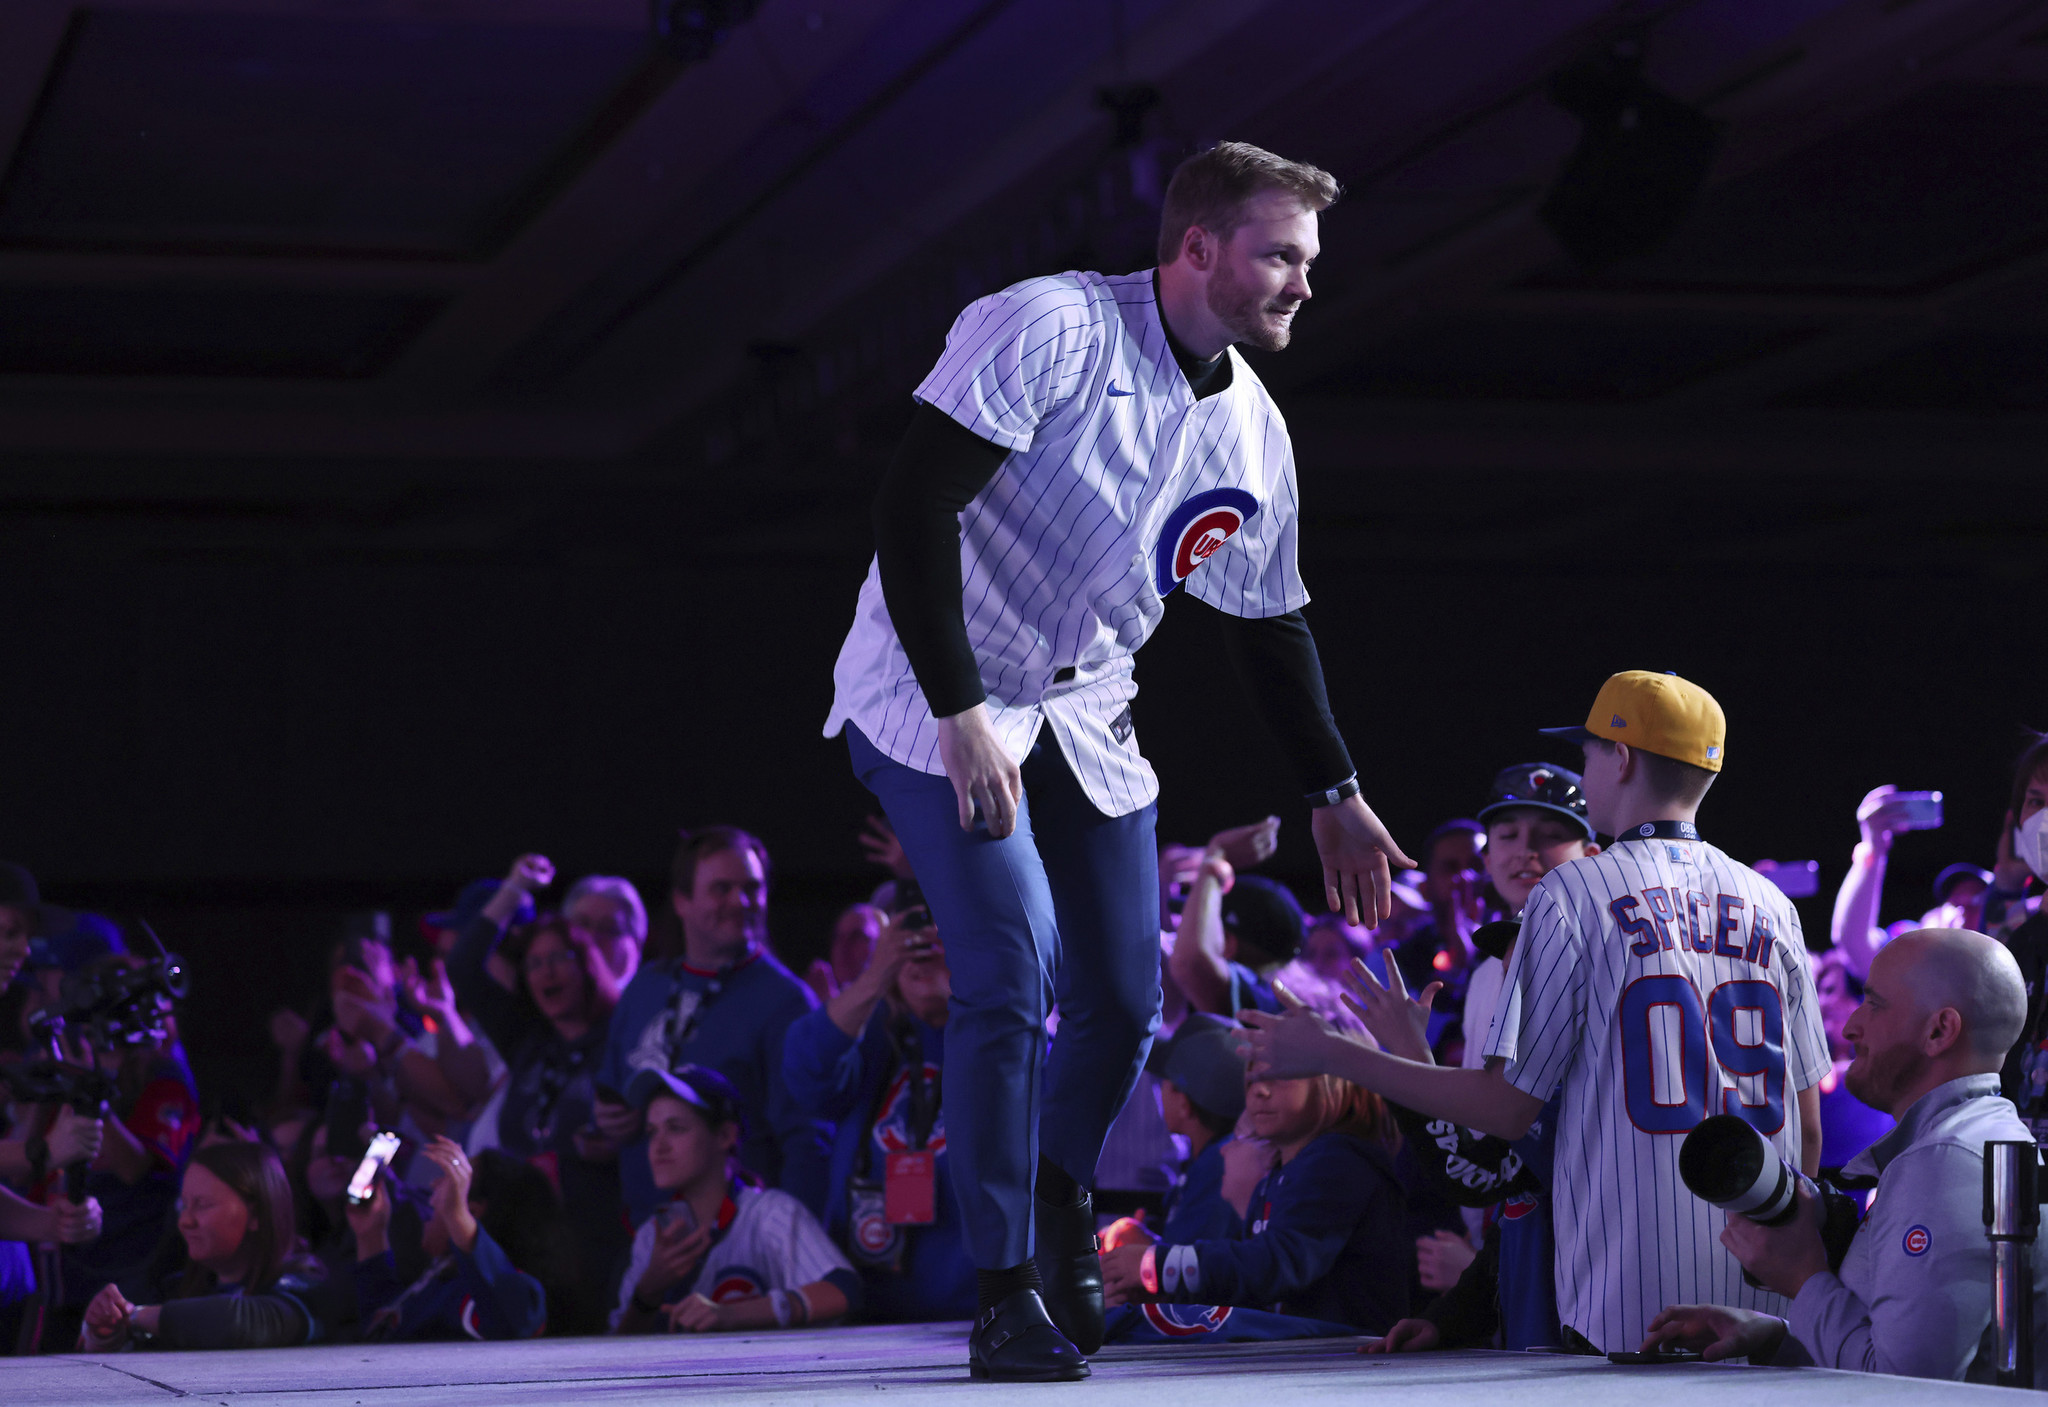 Cubs' Ian Happ explains what makes the Field of Dreams game special to him  – NBC Sports Chicago